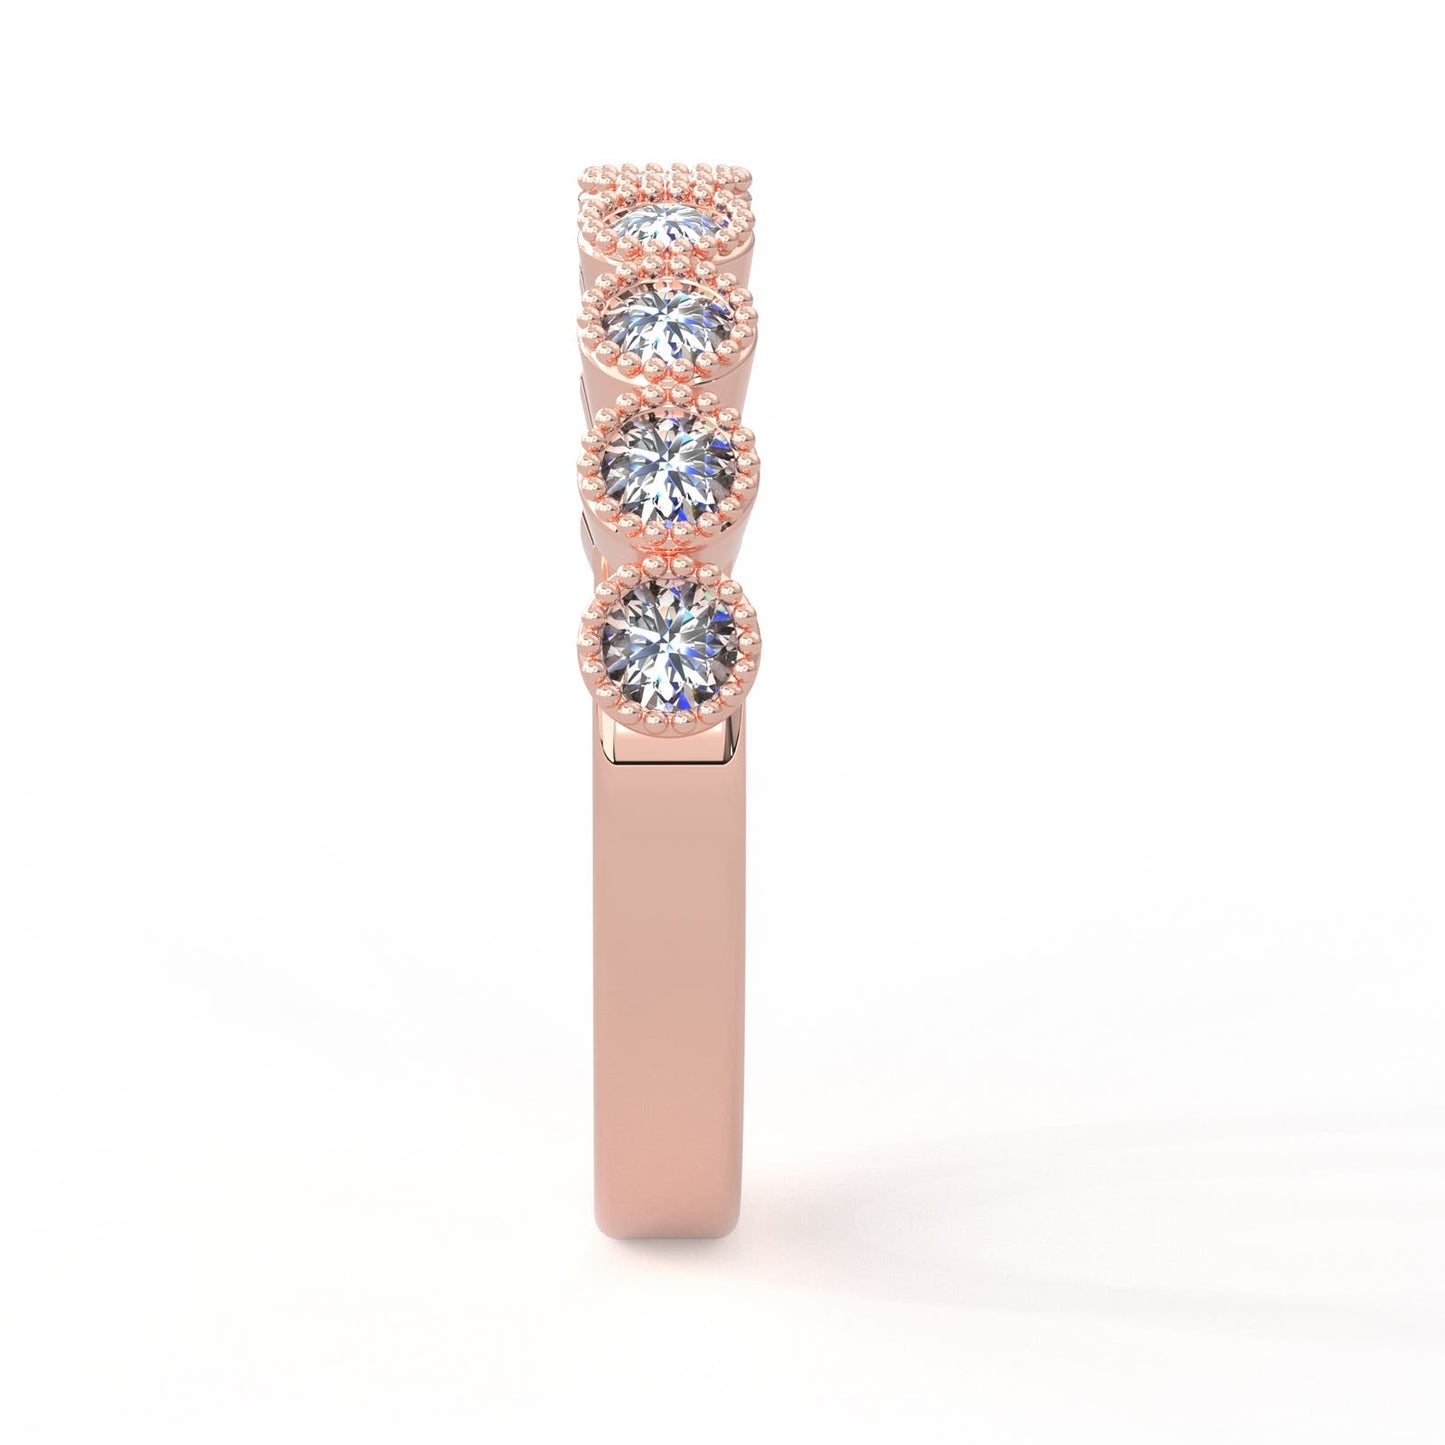 Rose Gold 18K Ring with 9 Real Diamonds 1 Ct. Bezel, 3.7g Round Brilliant